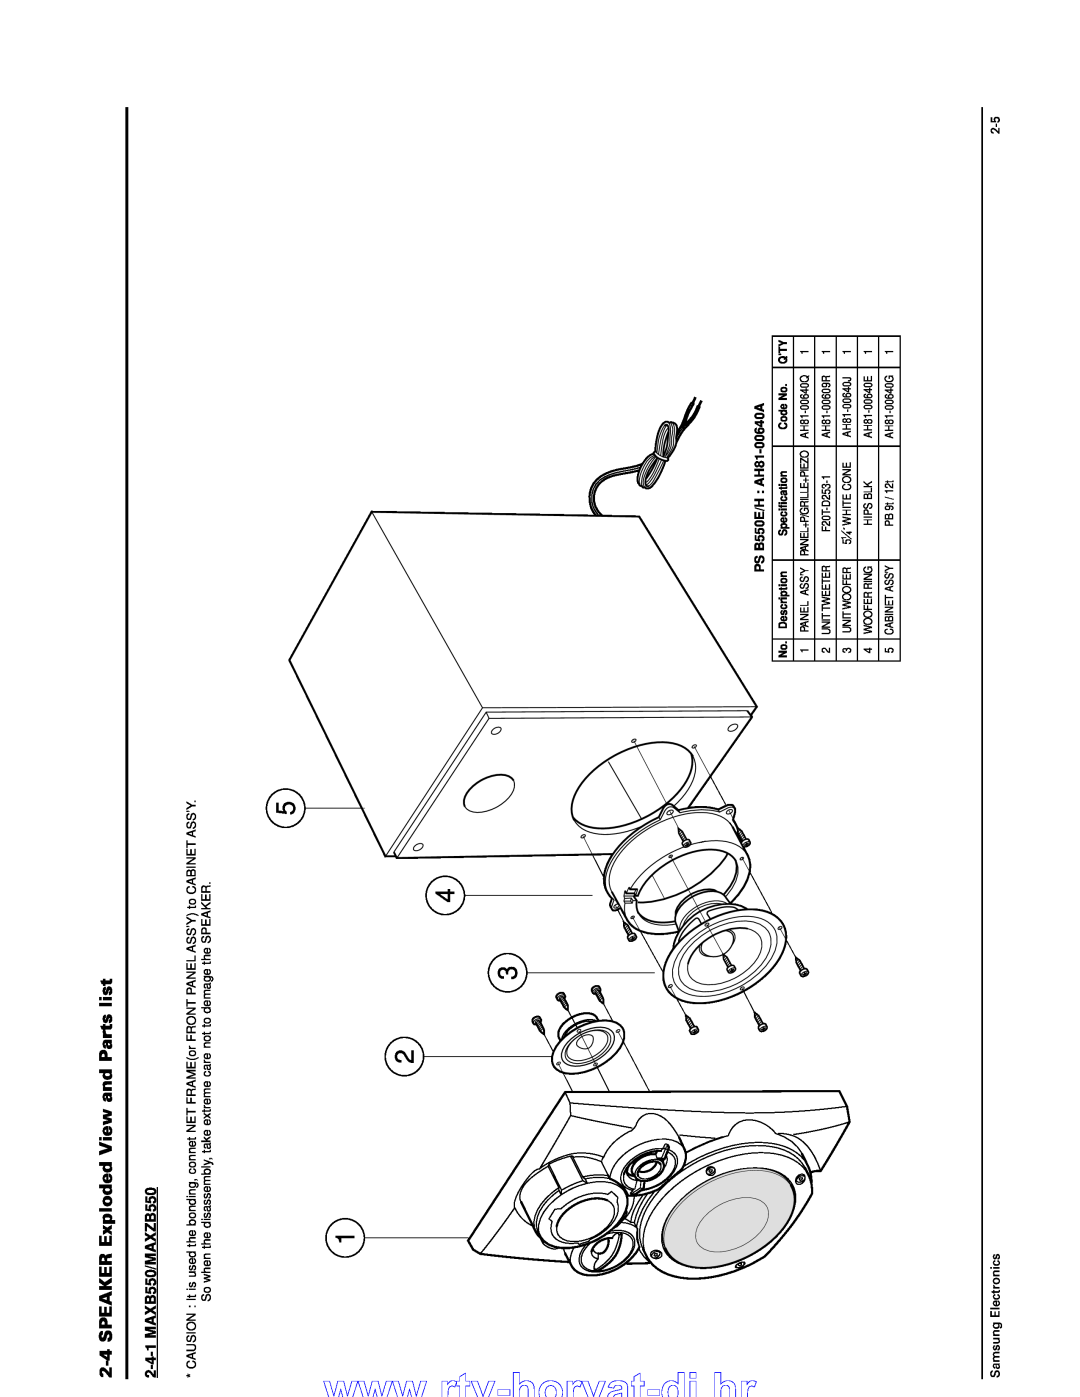 Samsung MAX-B550 horvat-dj.hr, 2-4SPEAKER Exploded View and Parts list, 2-4-1MAXB550/MAXZB550, PS B550E/H AH81-00640A 